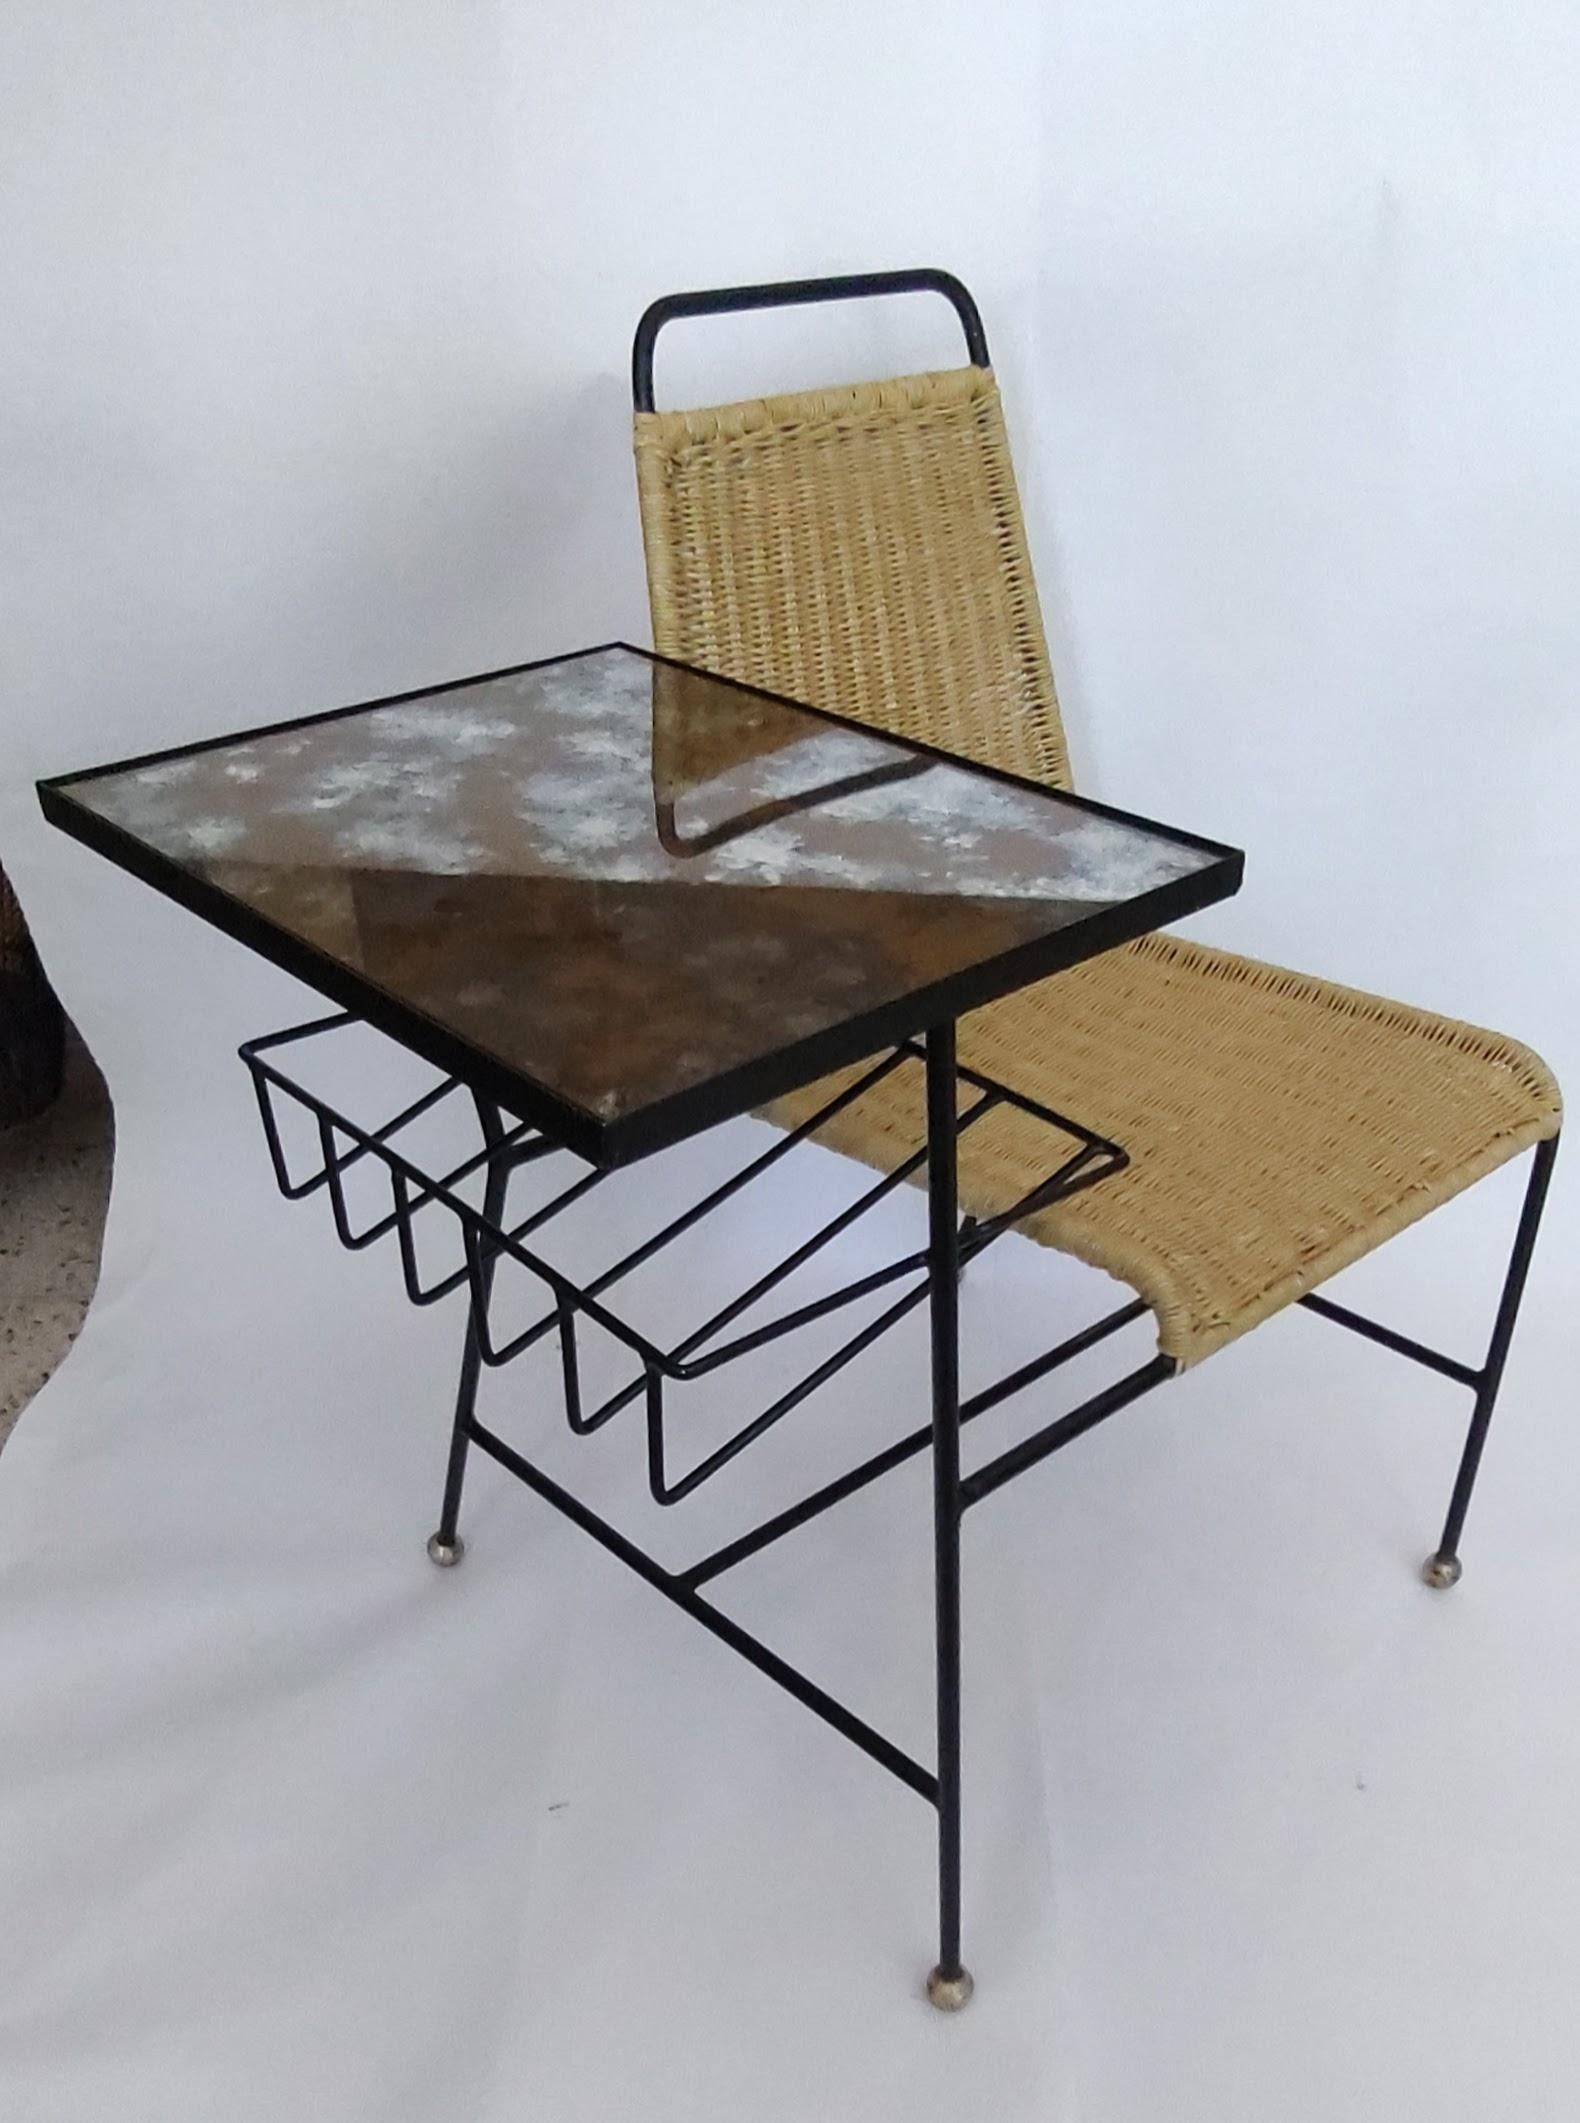 Very unique wrought iron and wicker Gossip Bench from the 50s. in the very simple yet sophisticated style of Arthur Umanoff (doesn´t have authentication). The design is simple and linear creating different volumes with crossing vertical and